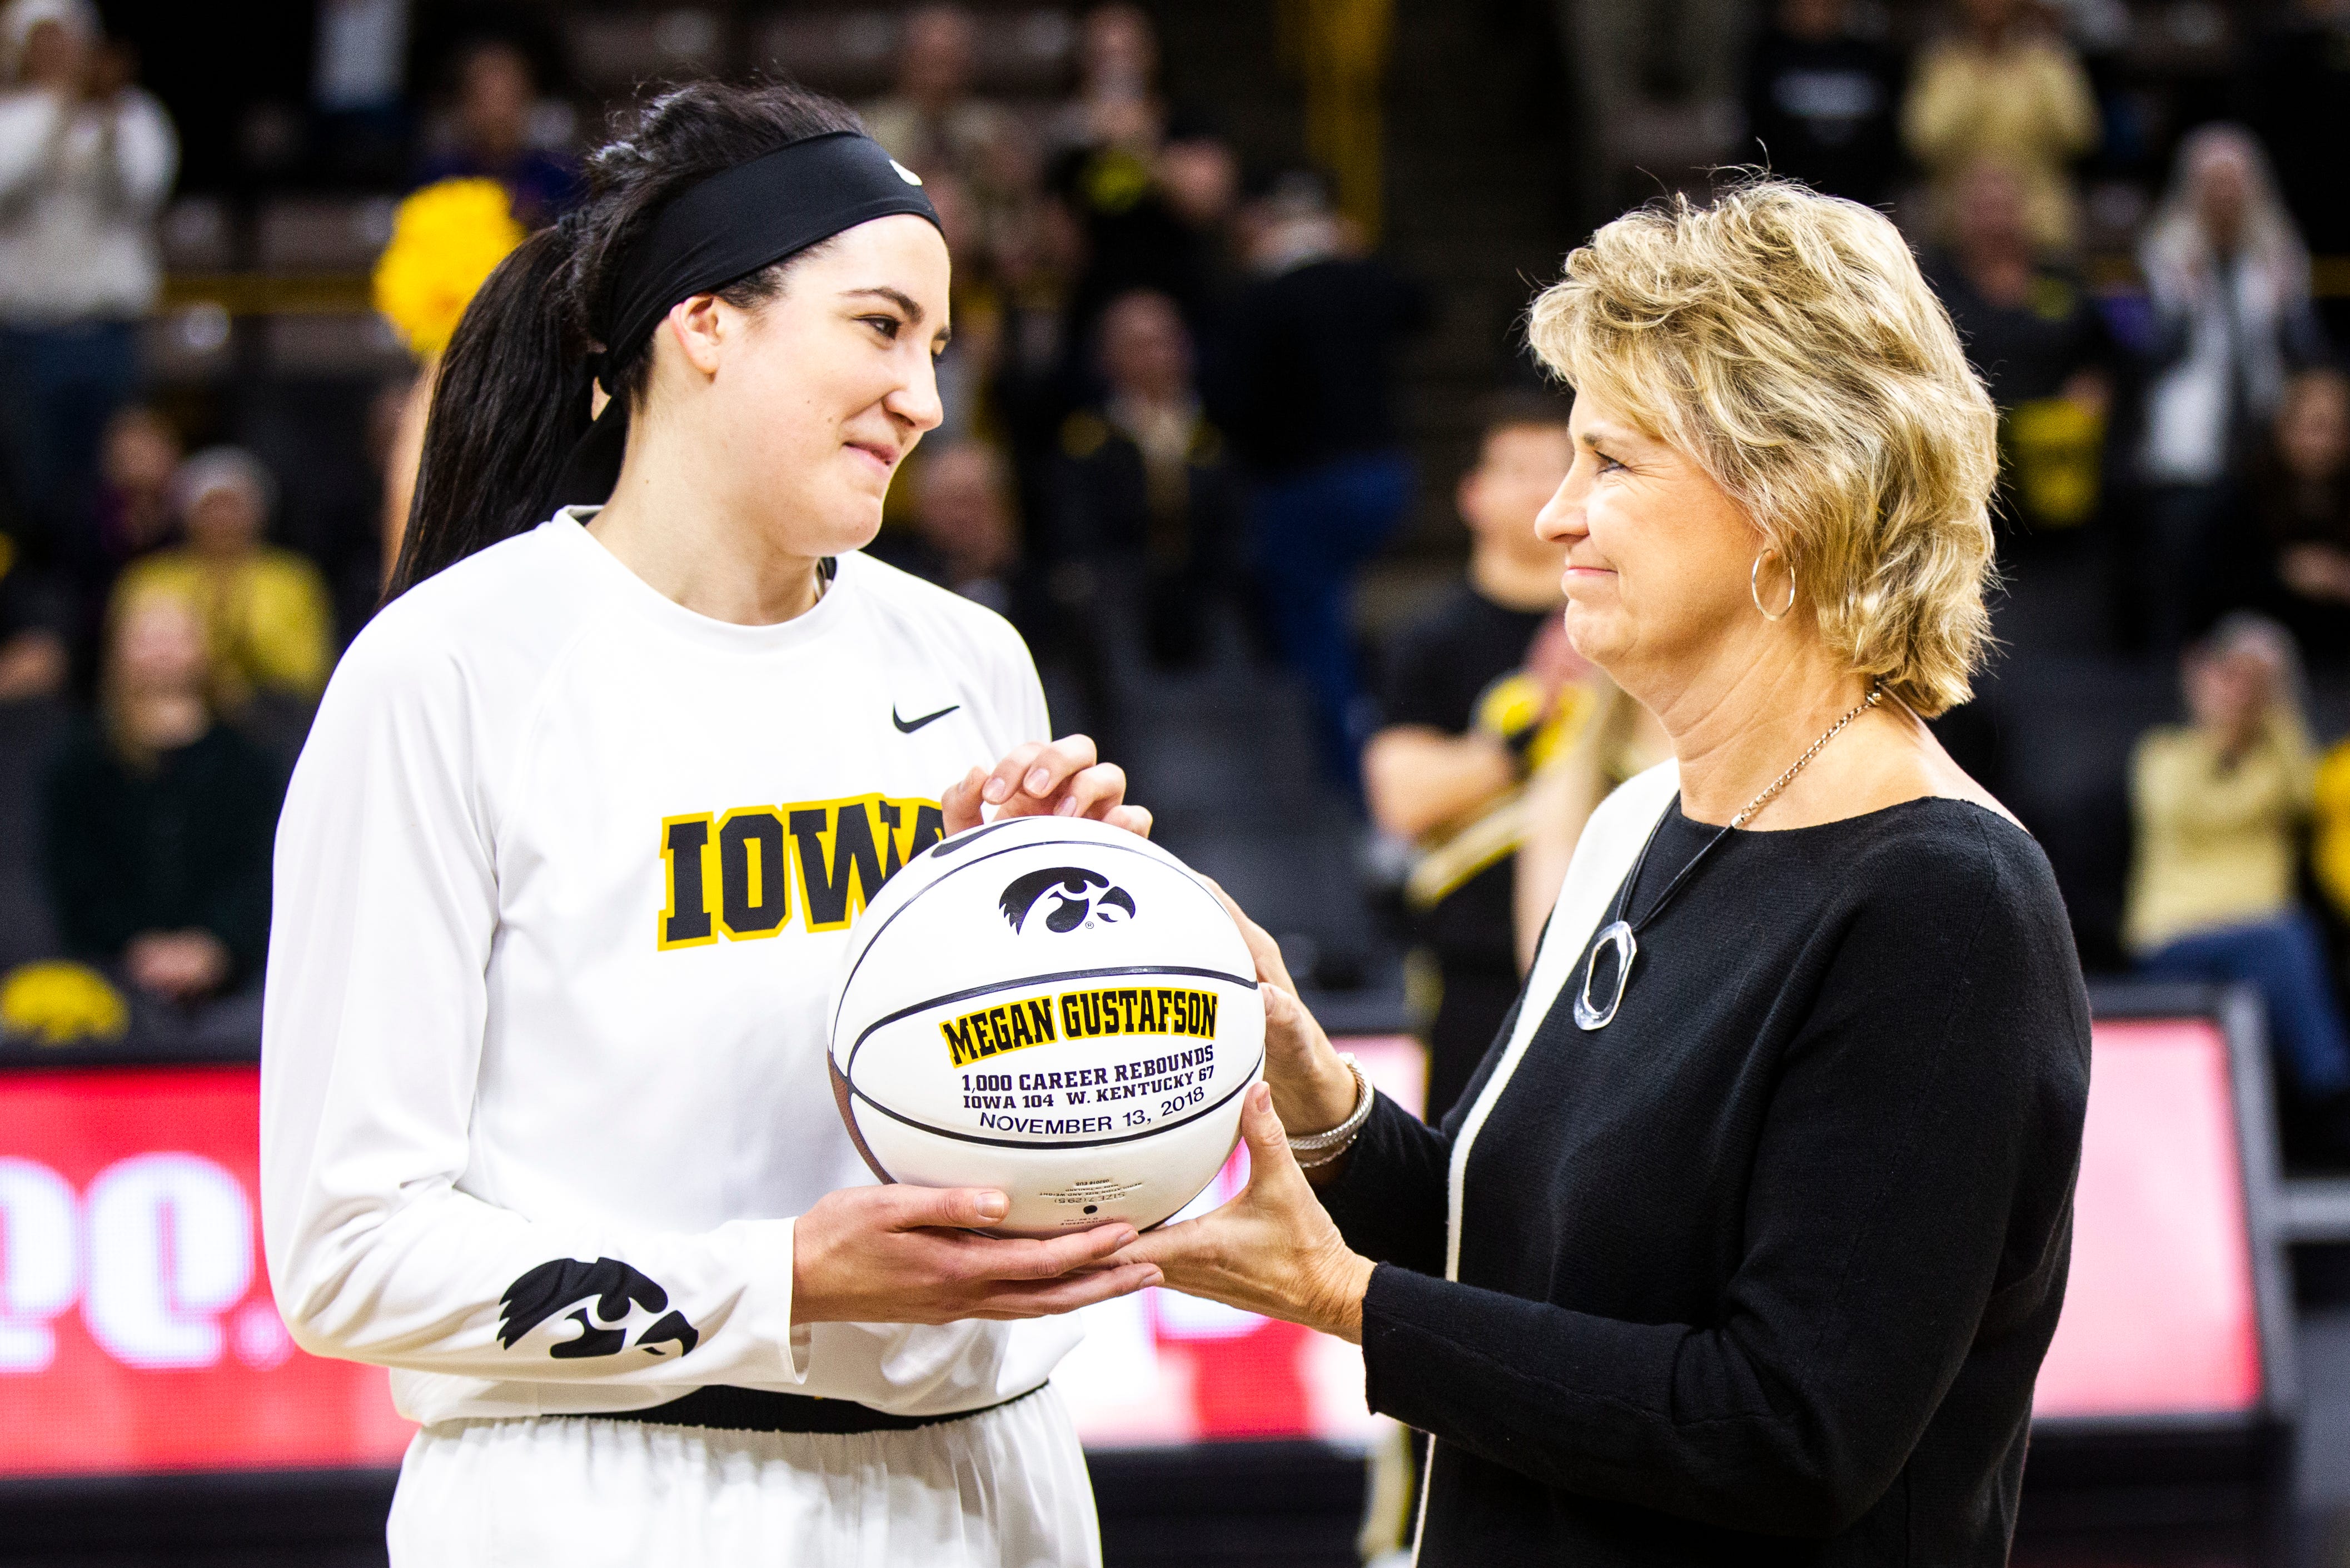 Iowa forward Megan Gustafson (10) is handed a ball acknowledging her 1,000 career rebounds by Iowa head coach Lisa Bluder before a NCAA women's basketball game on Saturday, Dec. 8, 2018, at Carver-Hawkeye Arena in Iowa City. Gustafson broke the Iowa rebounding record on Wednesday Dec. 5 against the Iowa State Cyclones.